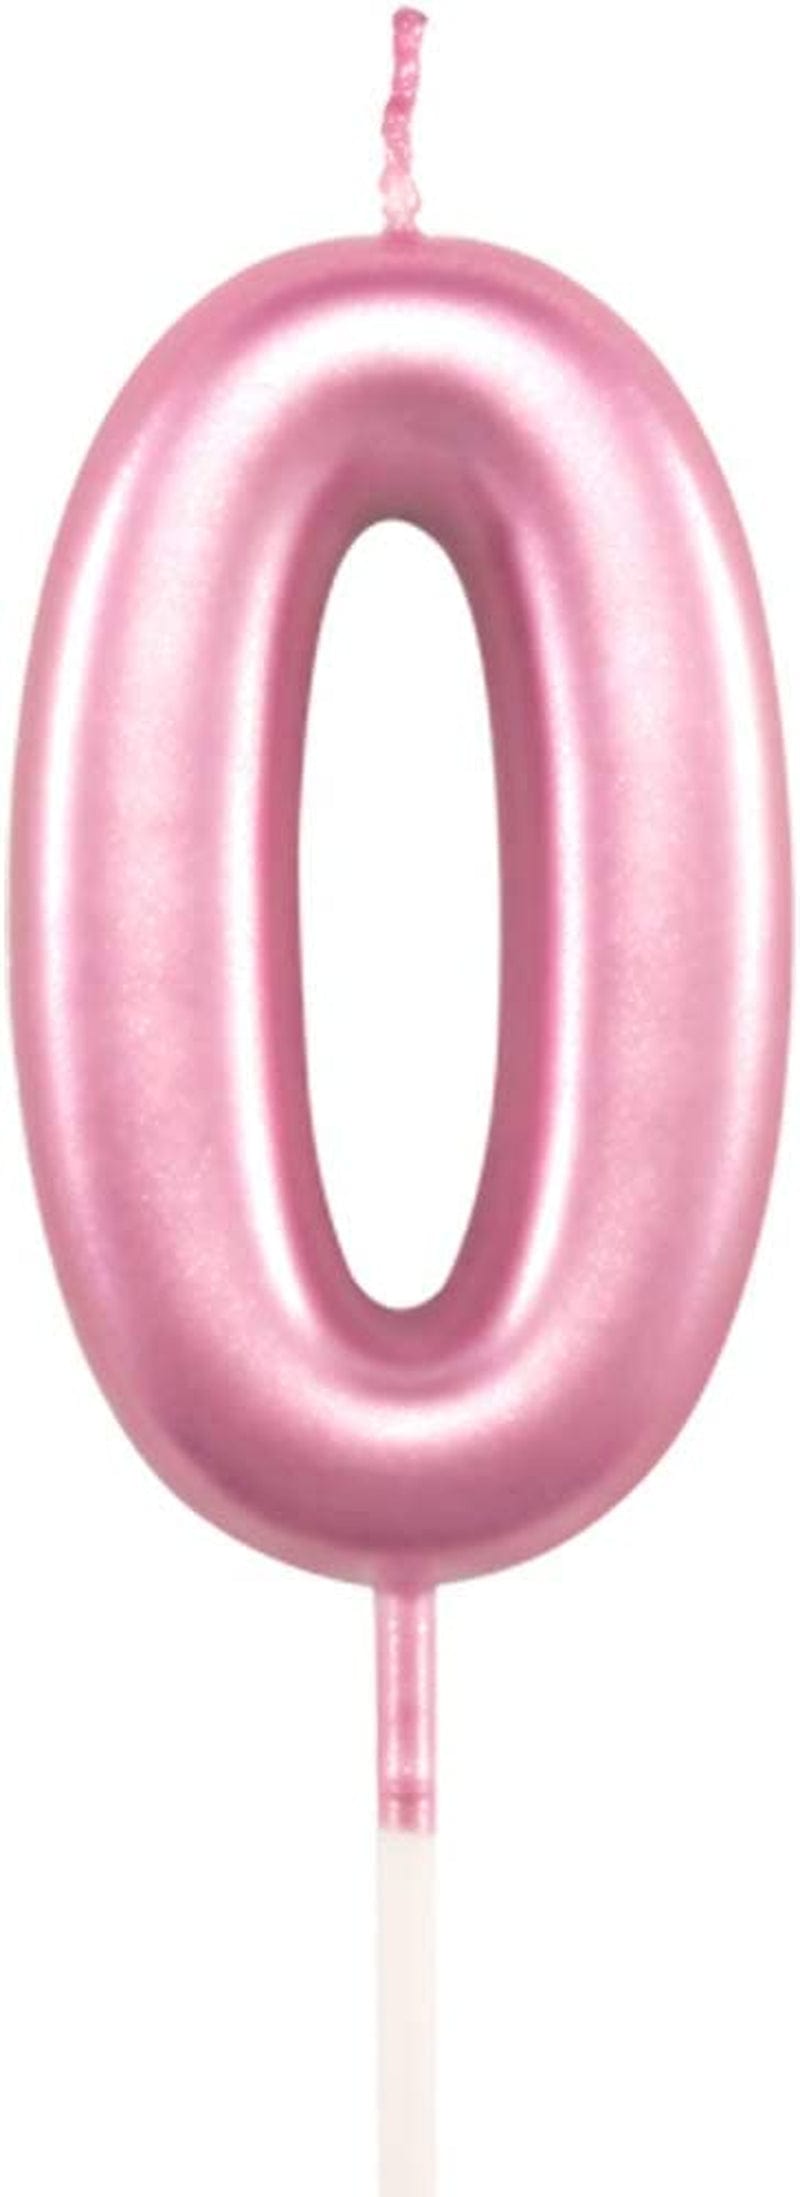 1St Birthday Candle First Year Pink Happy Birthday Number One Candles for Cake Topper Decoration for Party Kids Adults Numeral 1 10 100 11 21 16 14 12 18 13 11 91 Home & Garden > Decor > Seasonal & Holiday Decorations XNOVA Number 0  